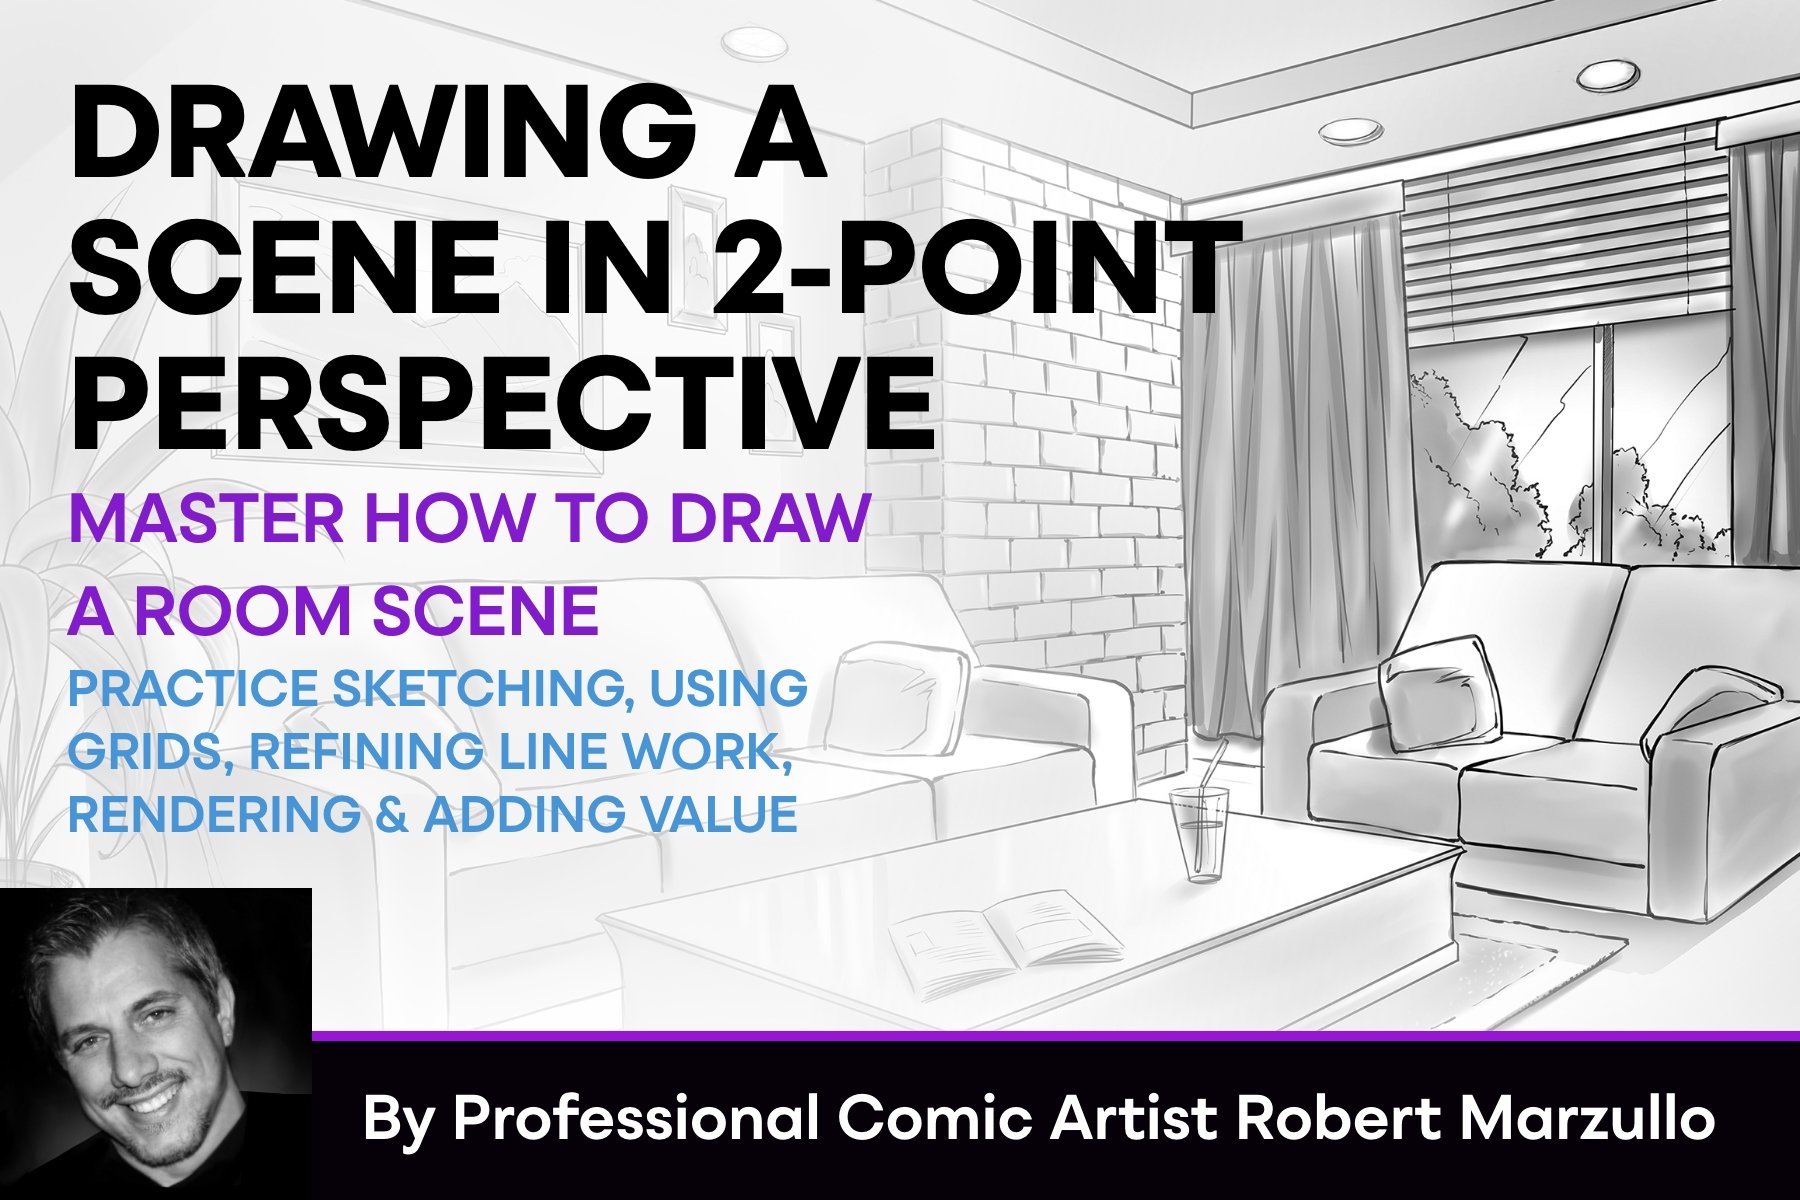 Drawing A Scene In 2-Point Perspective